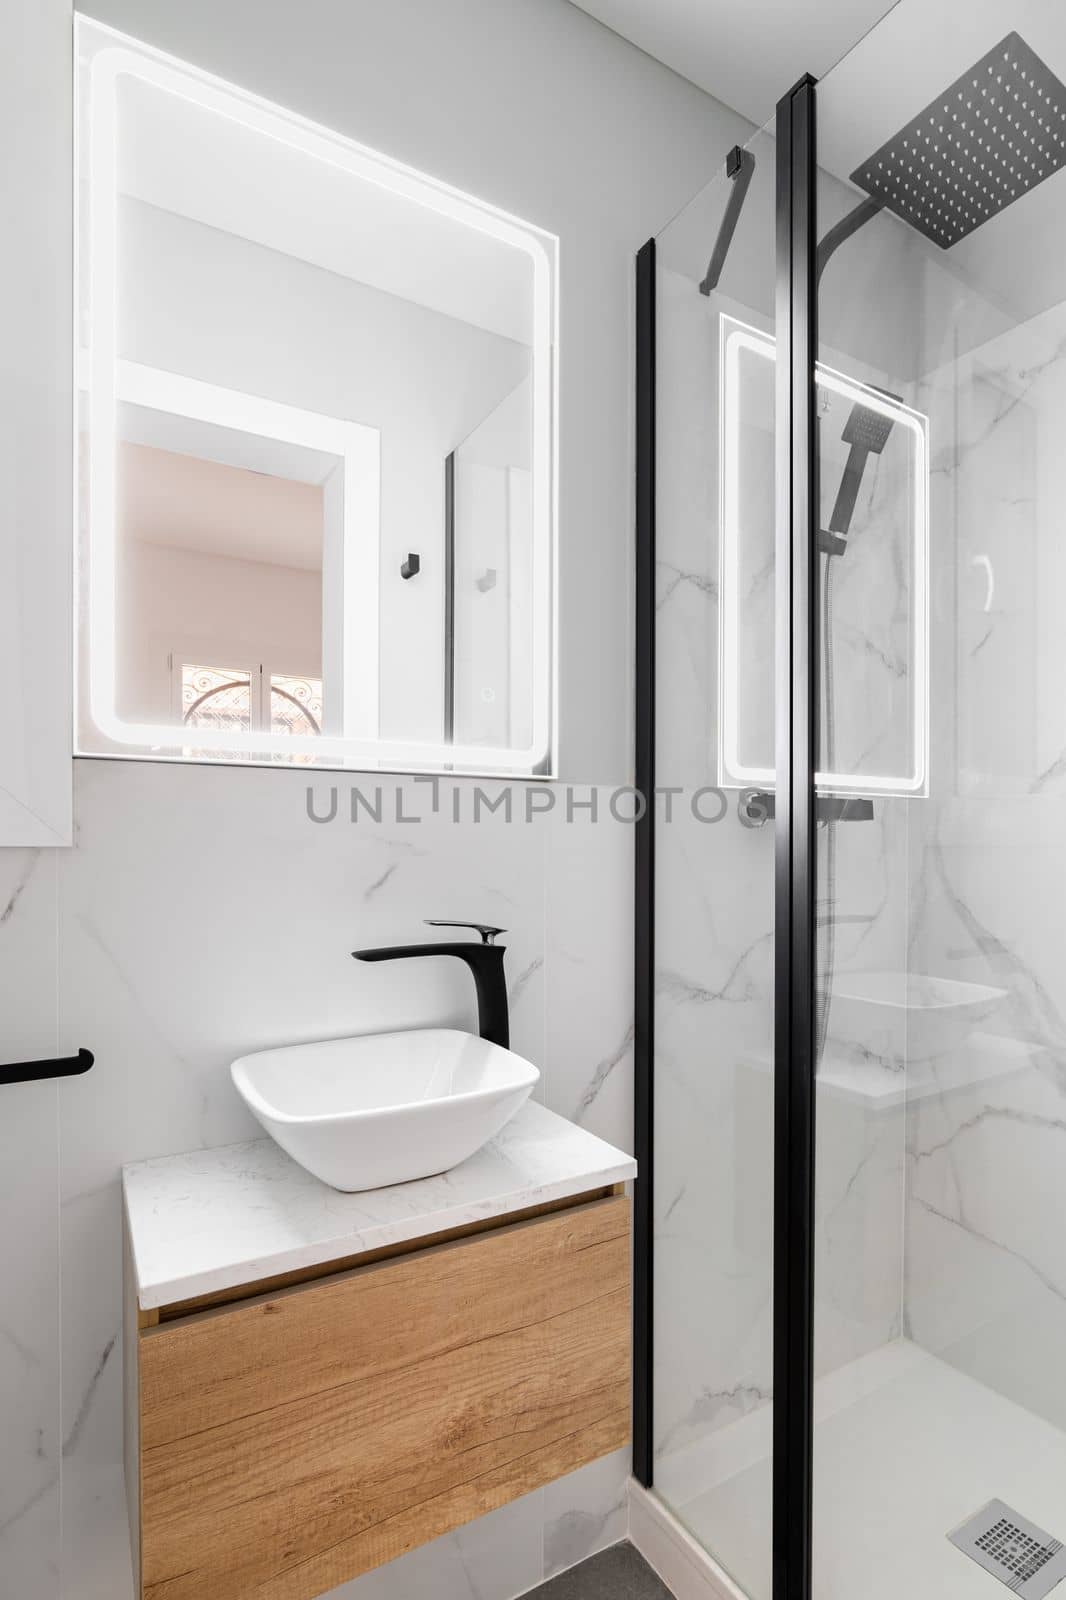 Bathroom with modern designer renovation and fittings. Vanity sink with black faucet. Walls of white granite with gray stains are beautifully illuminated by bright white light from square mirror